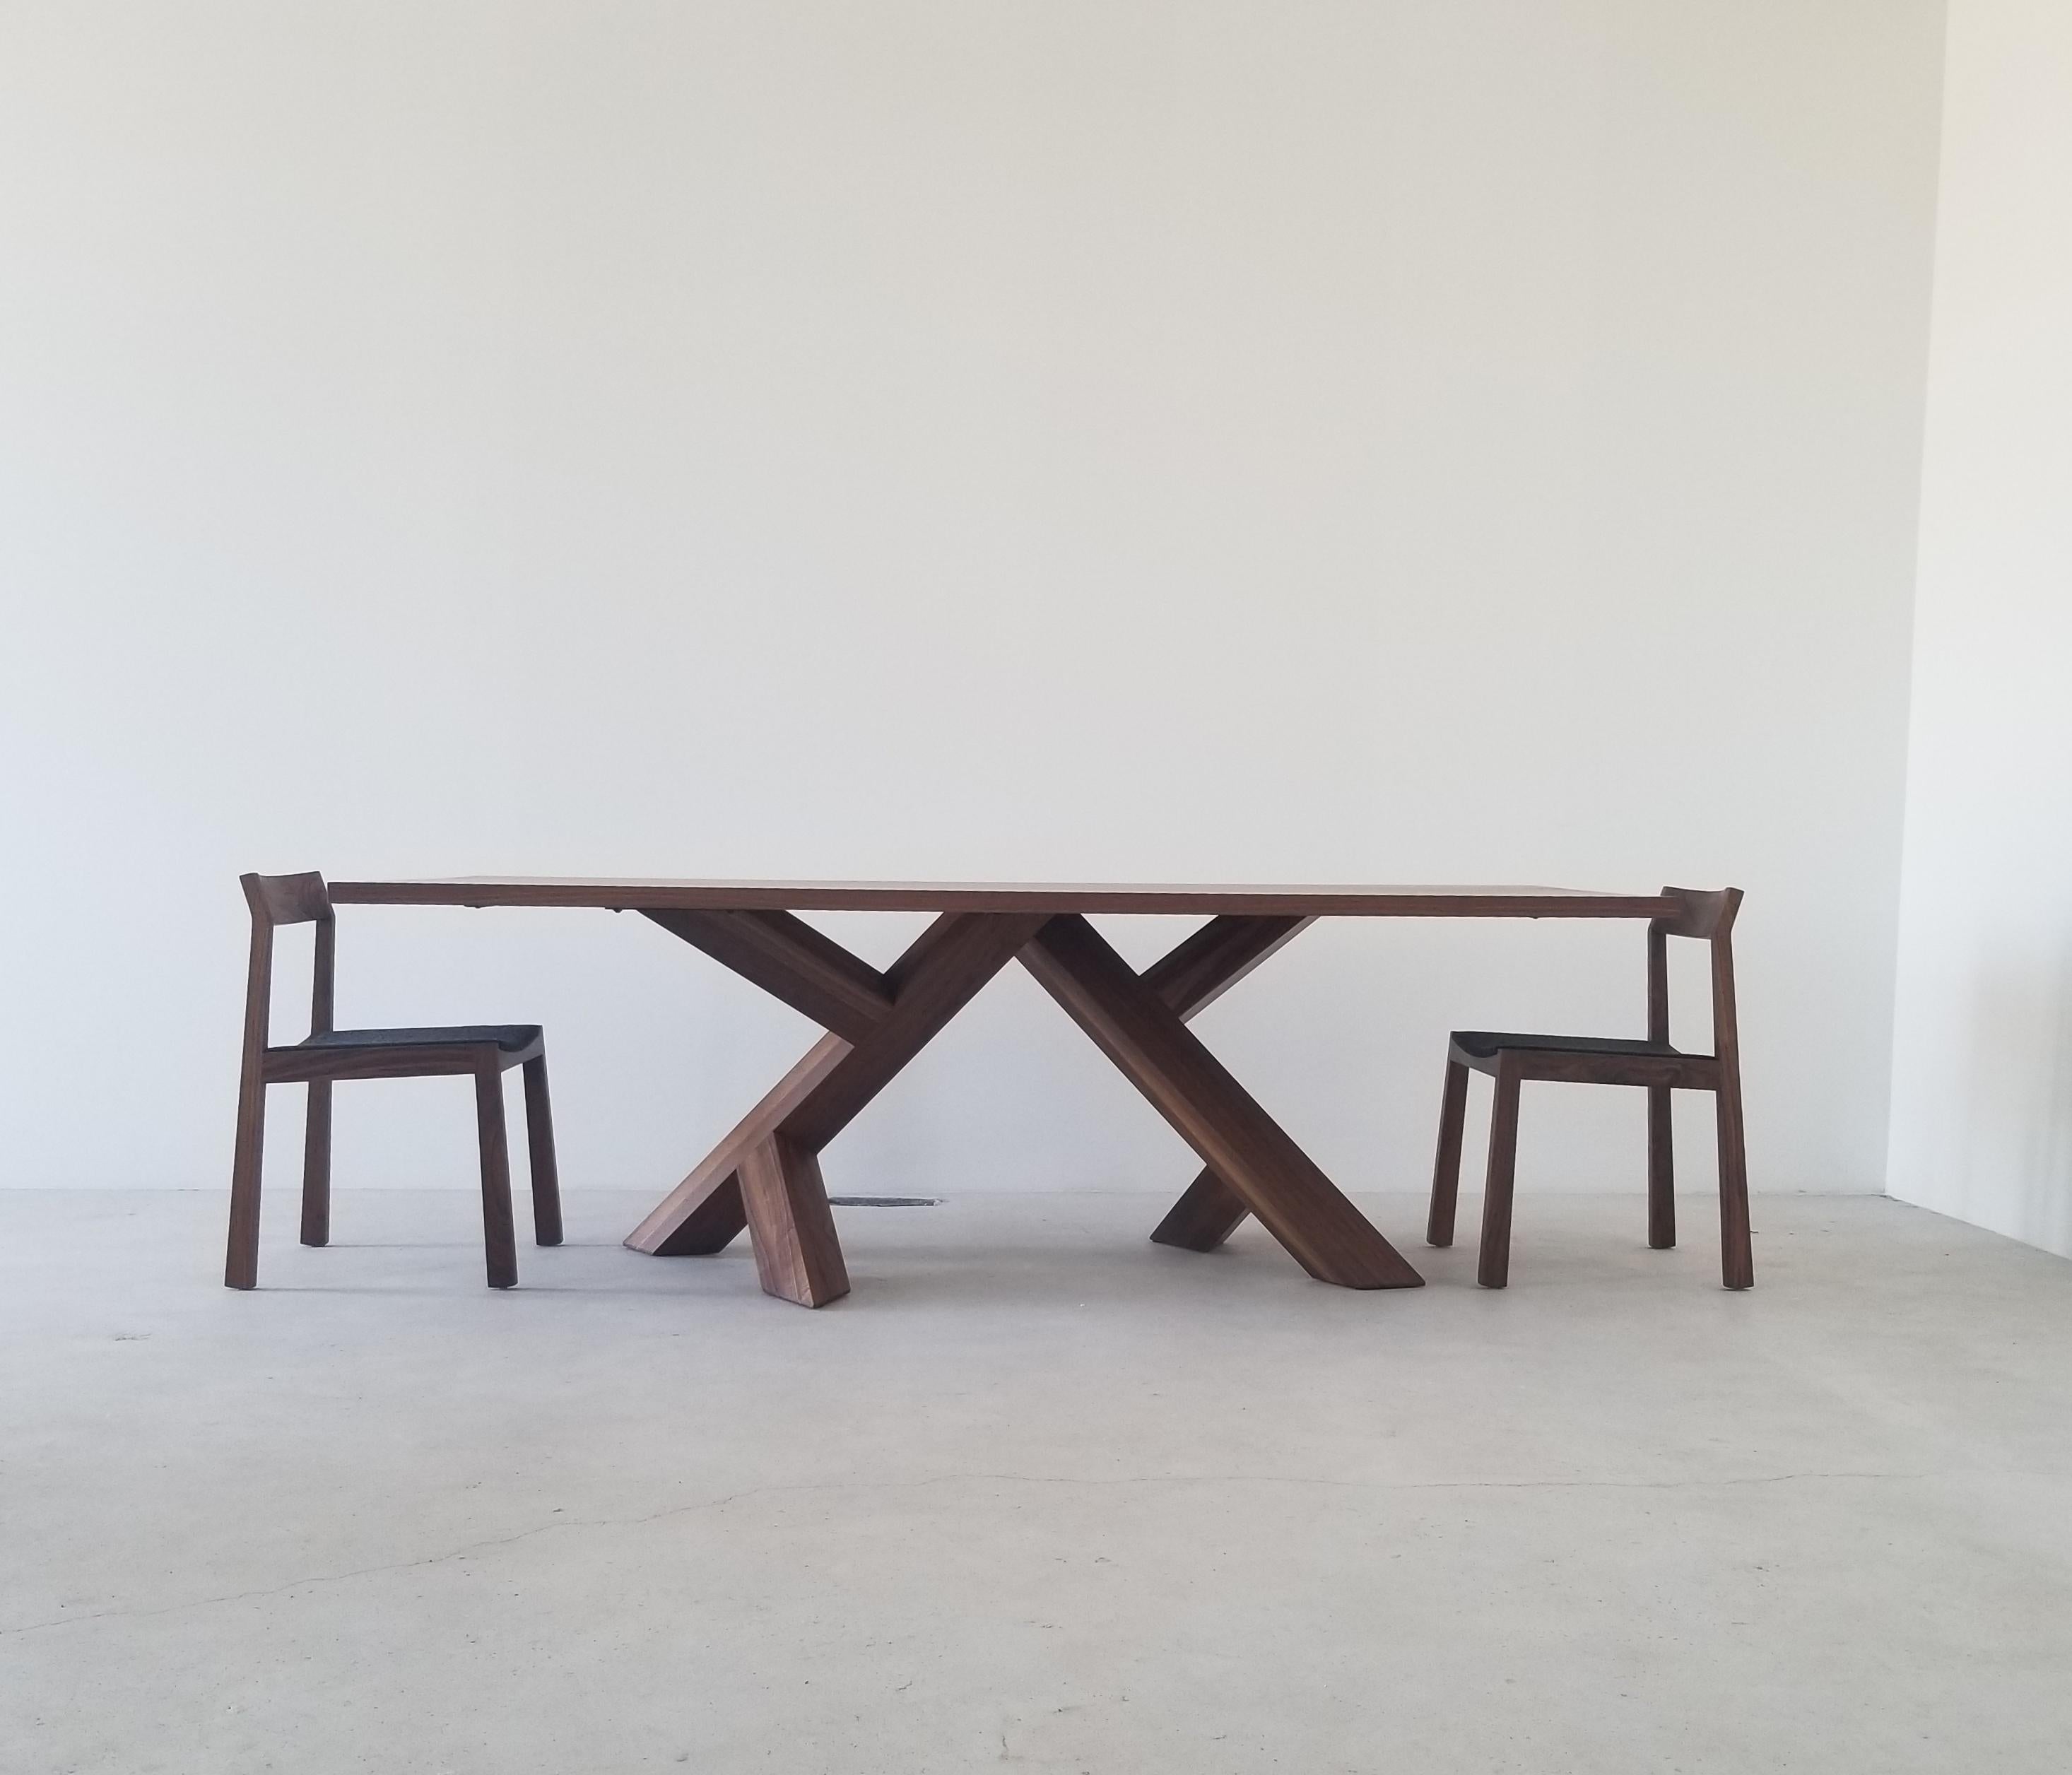 Hand-Crafted Iconoclast Modern Hardwood Dining Table by Izm Design